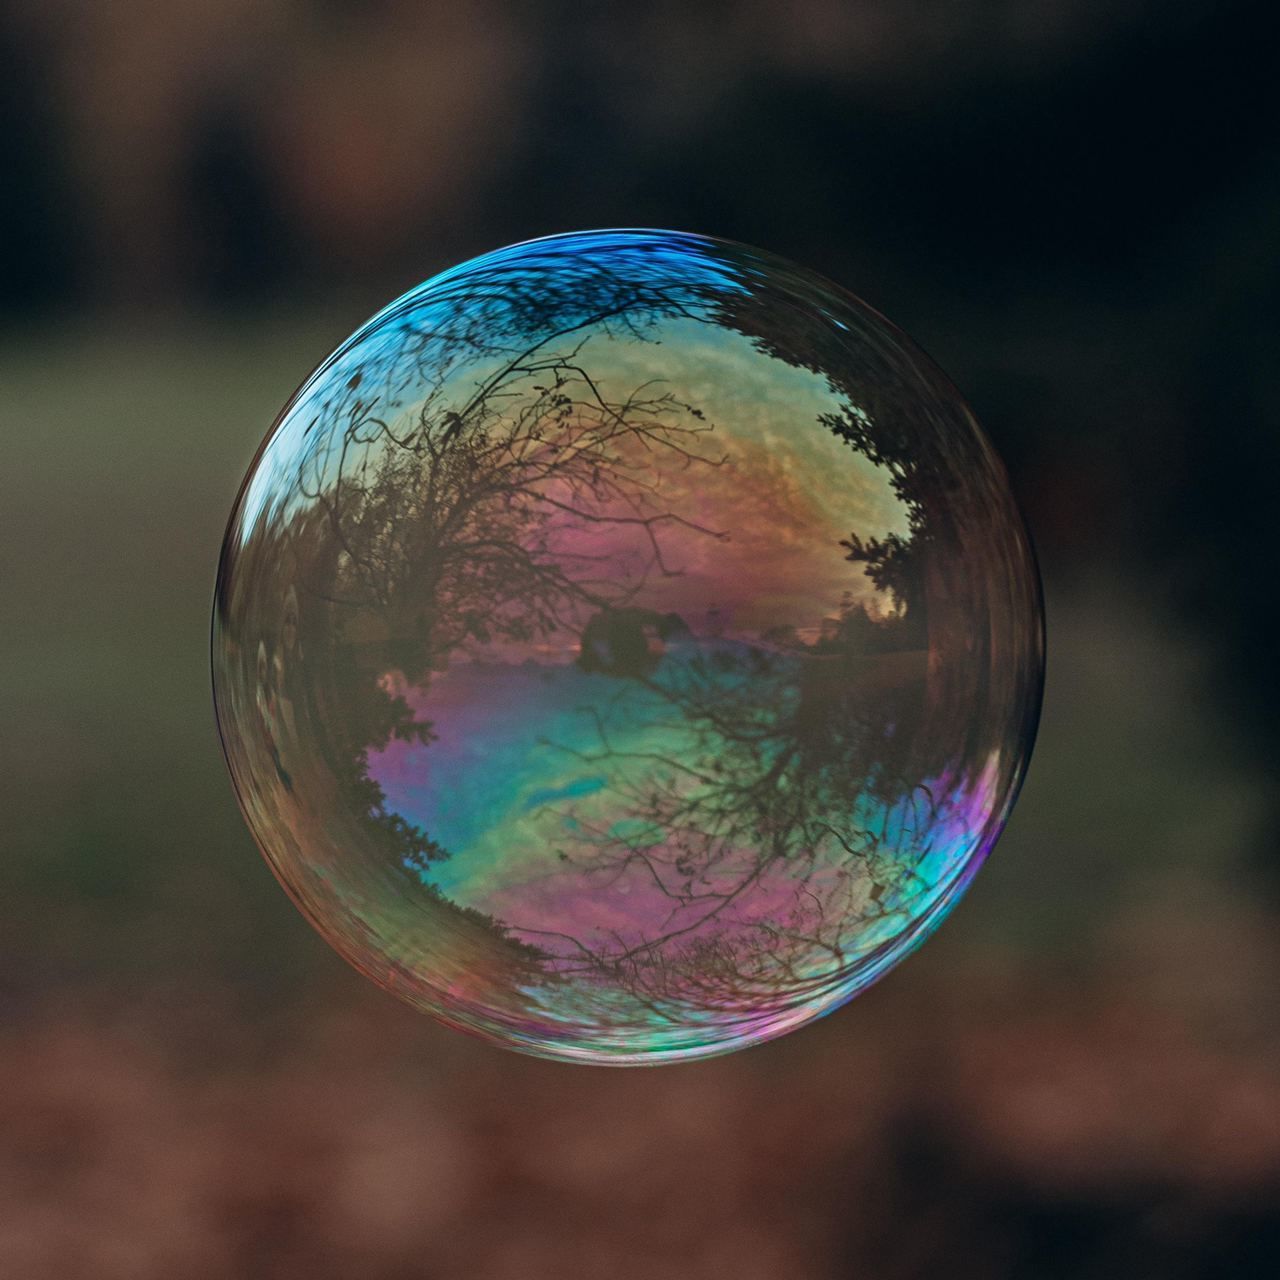 CLOSE-UP OF BUBBLE